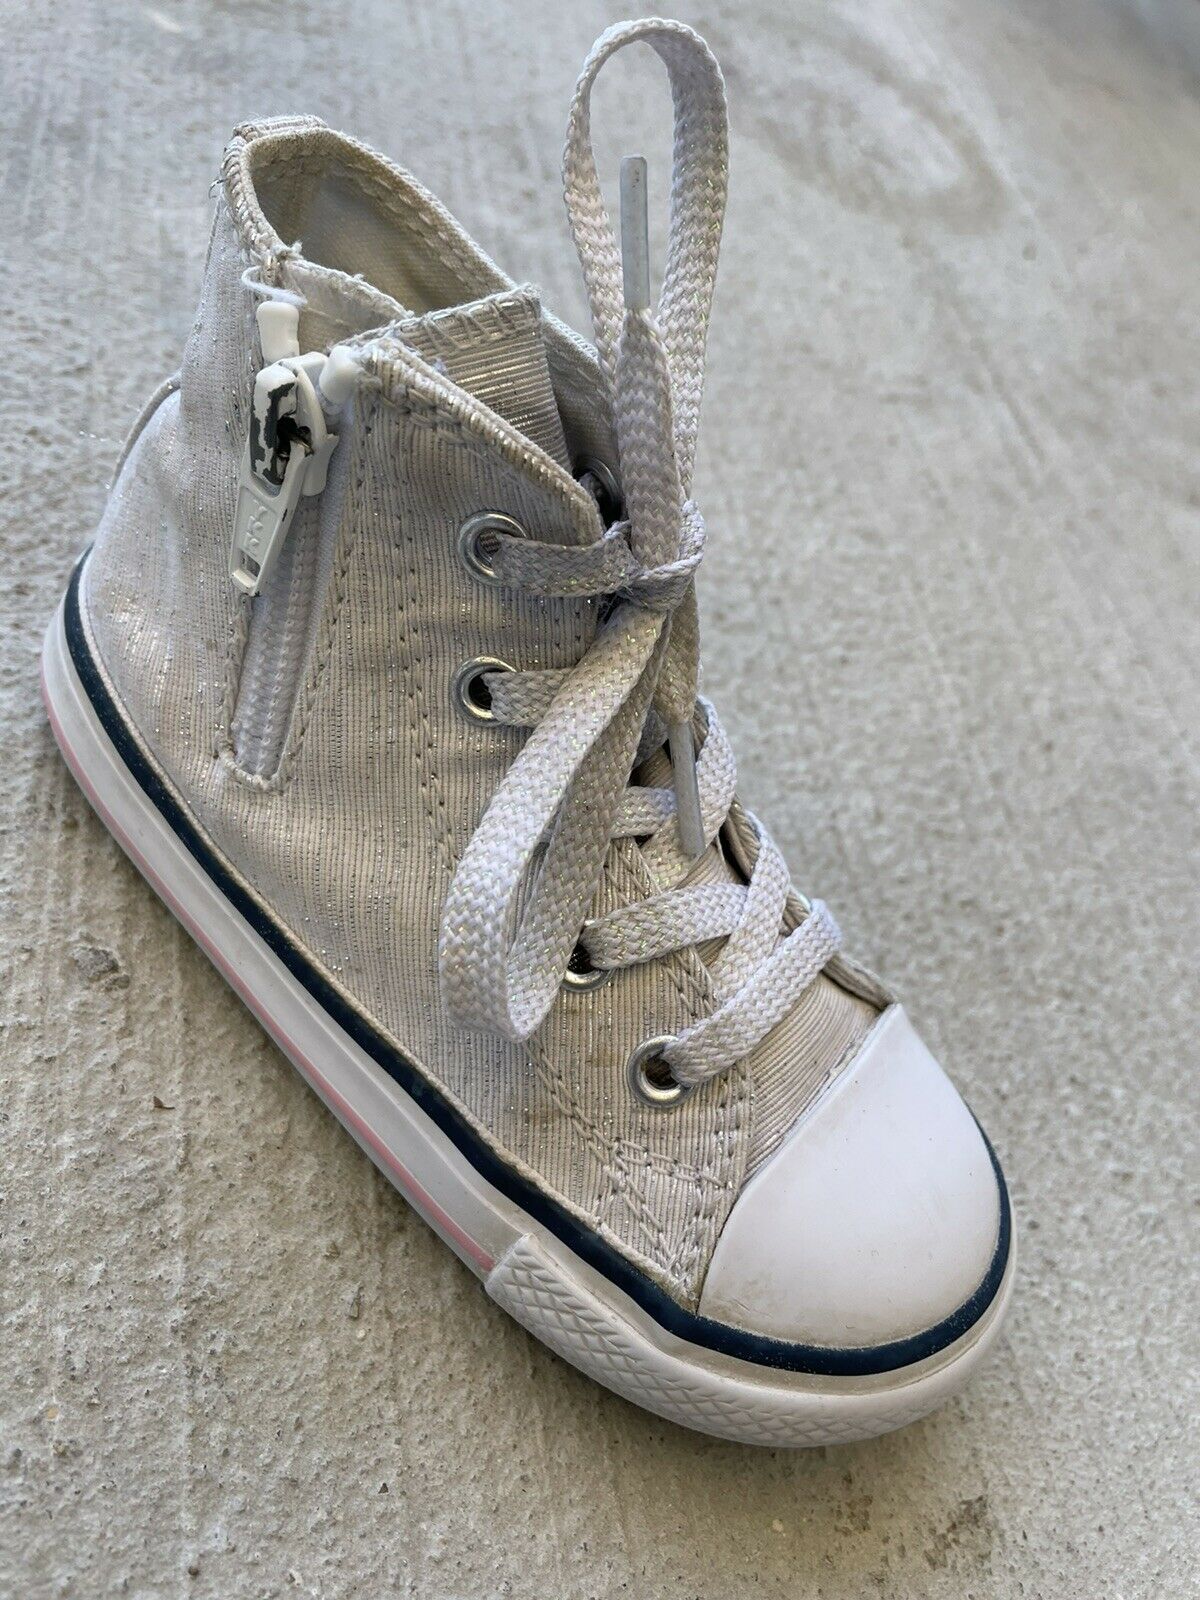 Converse All Star Toddler Girls White Glitter High Top Sneakers Shoes Size 7